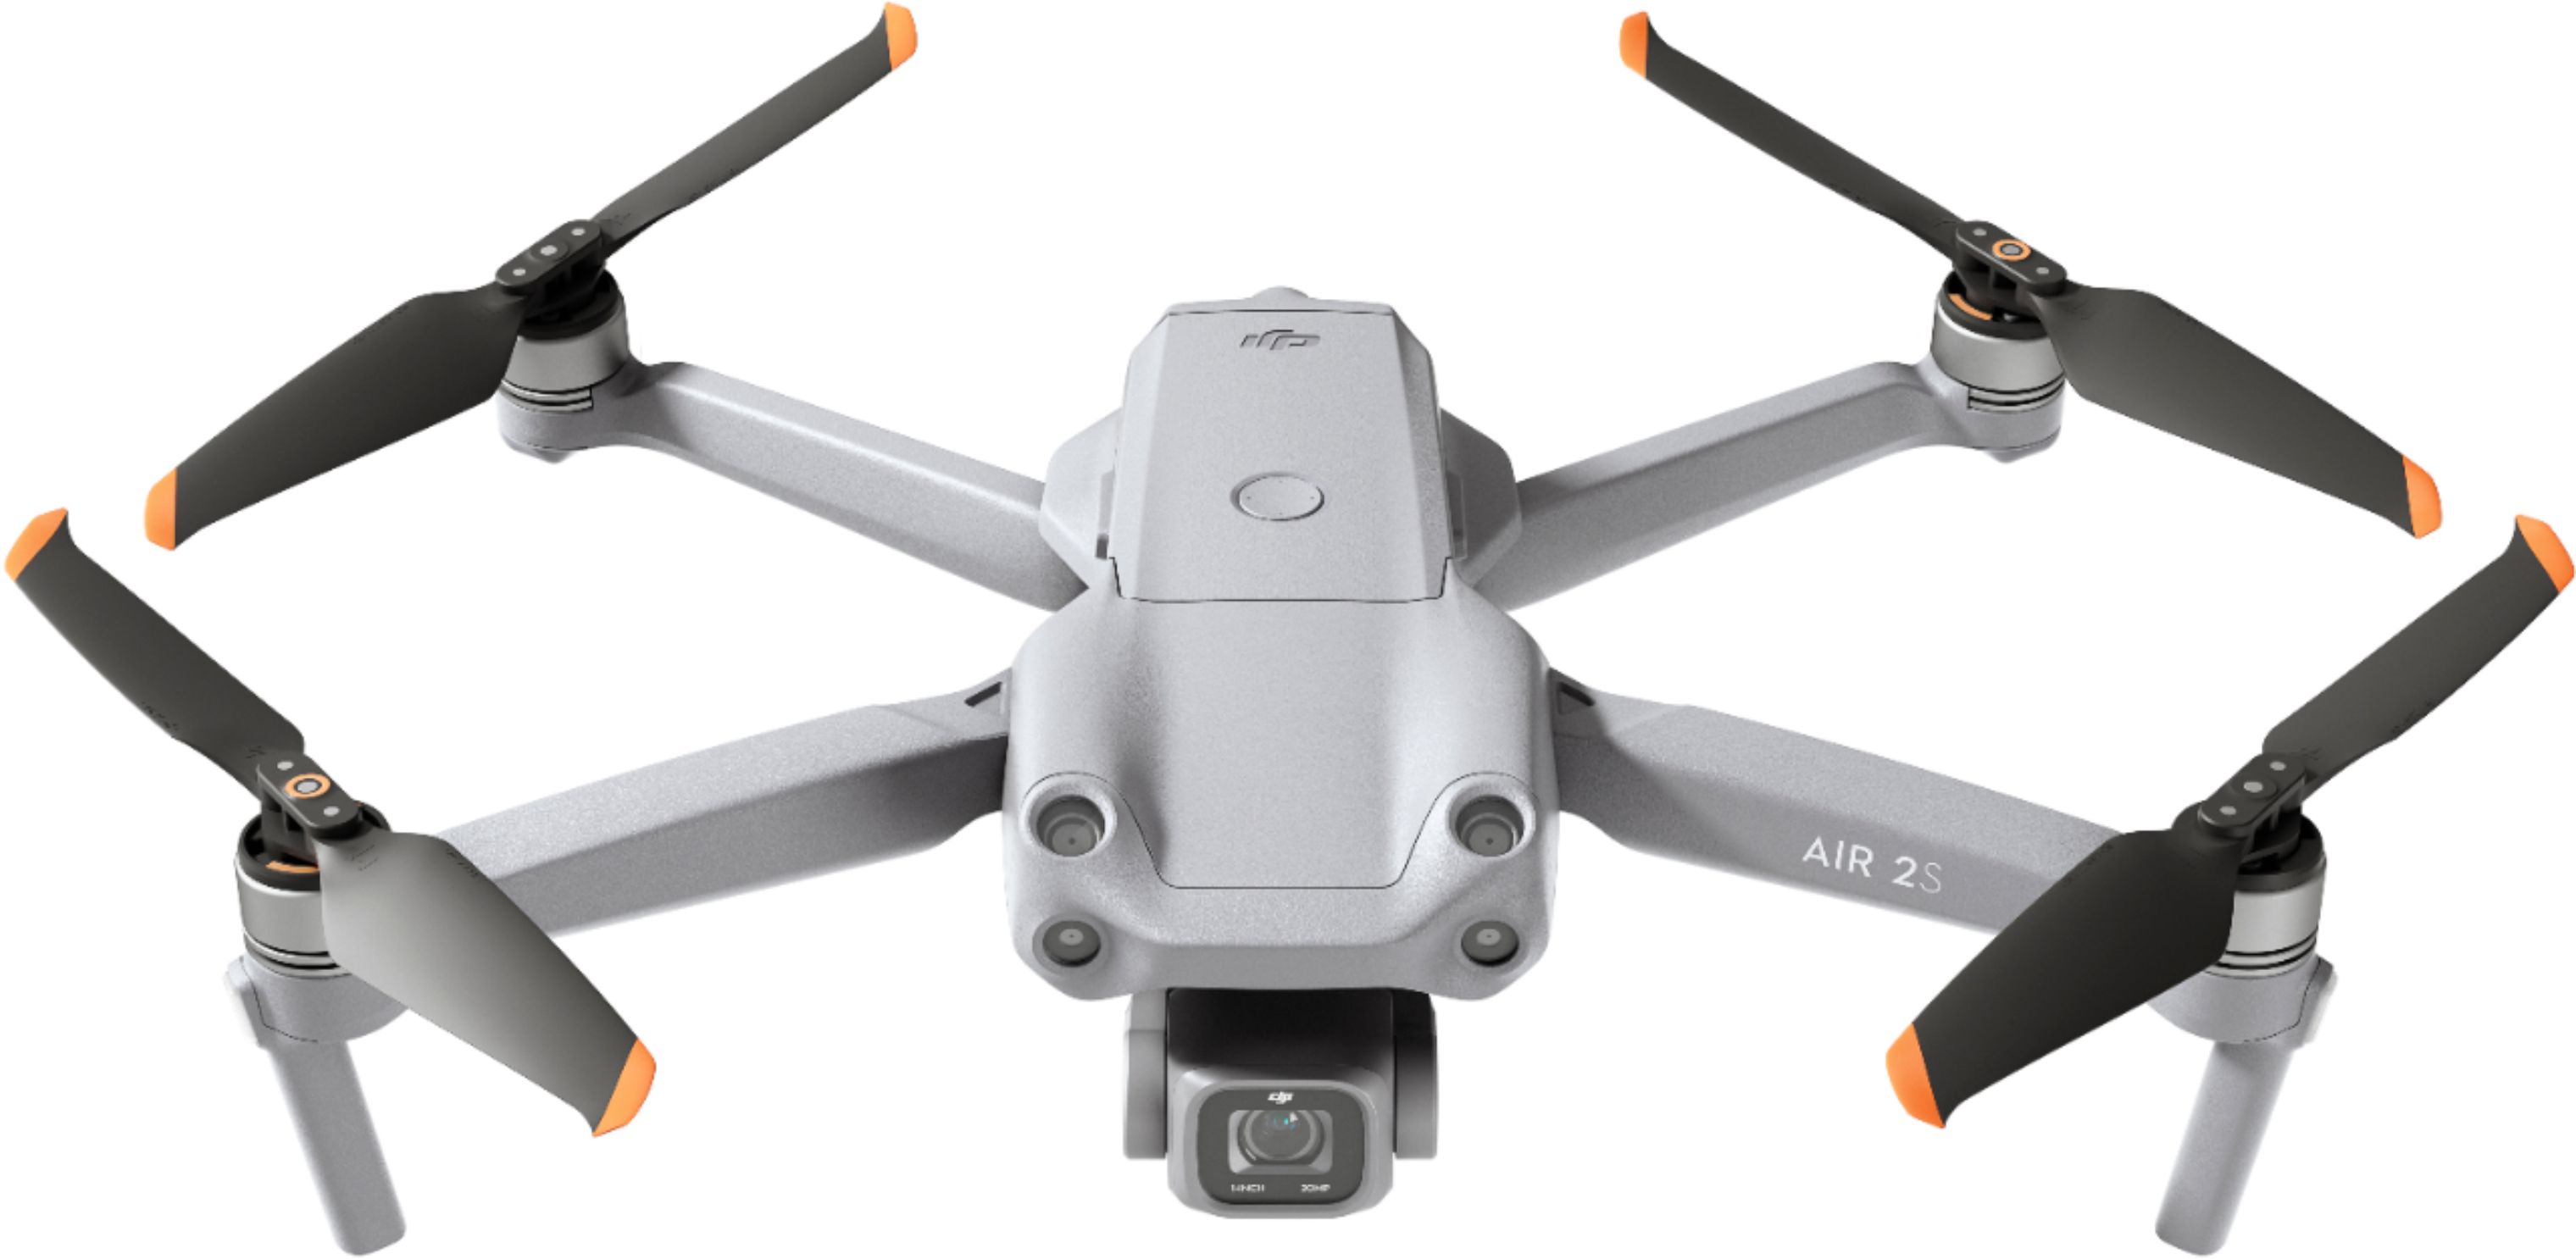 Image of DJI - Air 2S Drone with Remote Control - Gray